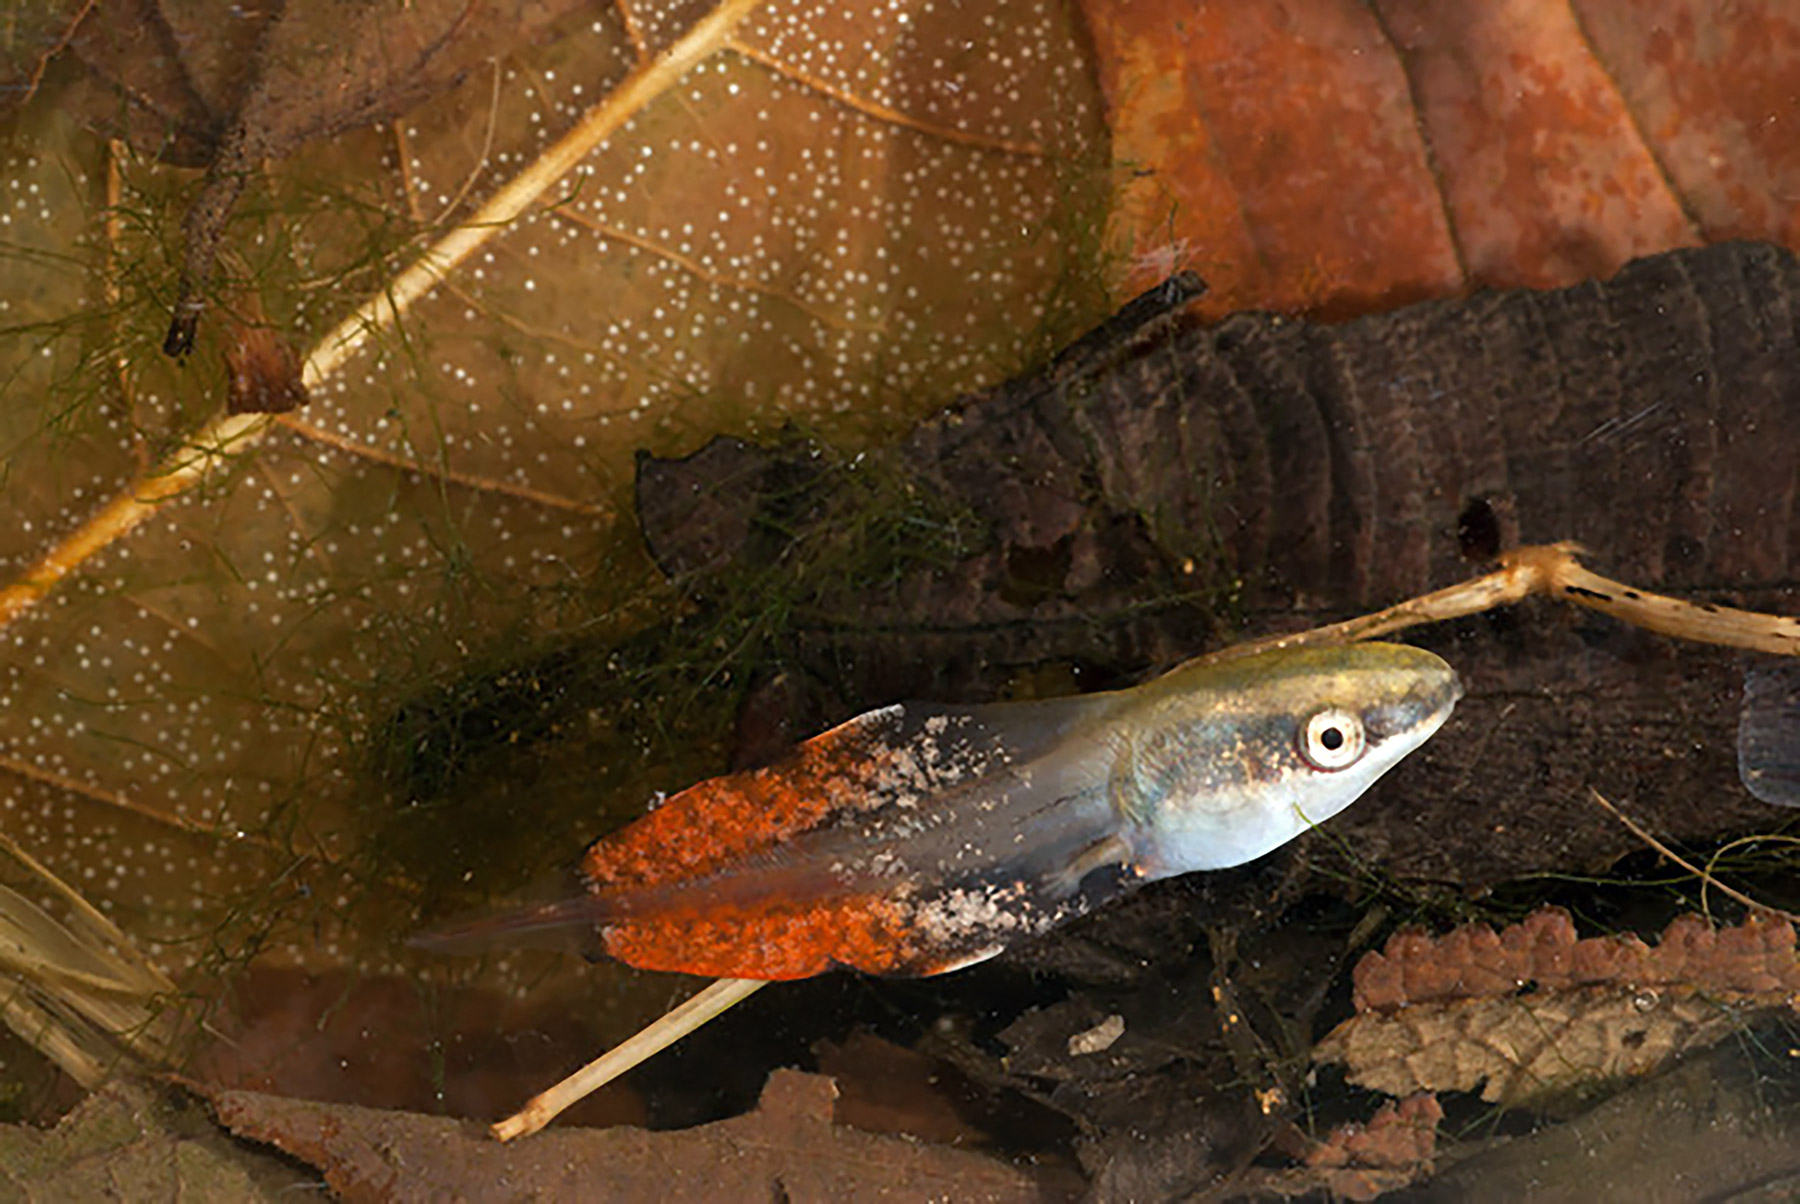 Tadpole with a large, colorful tail